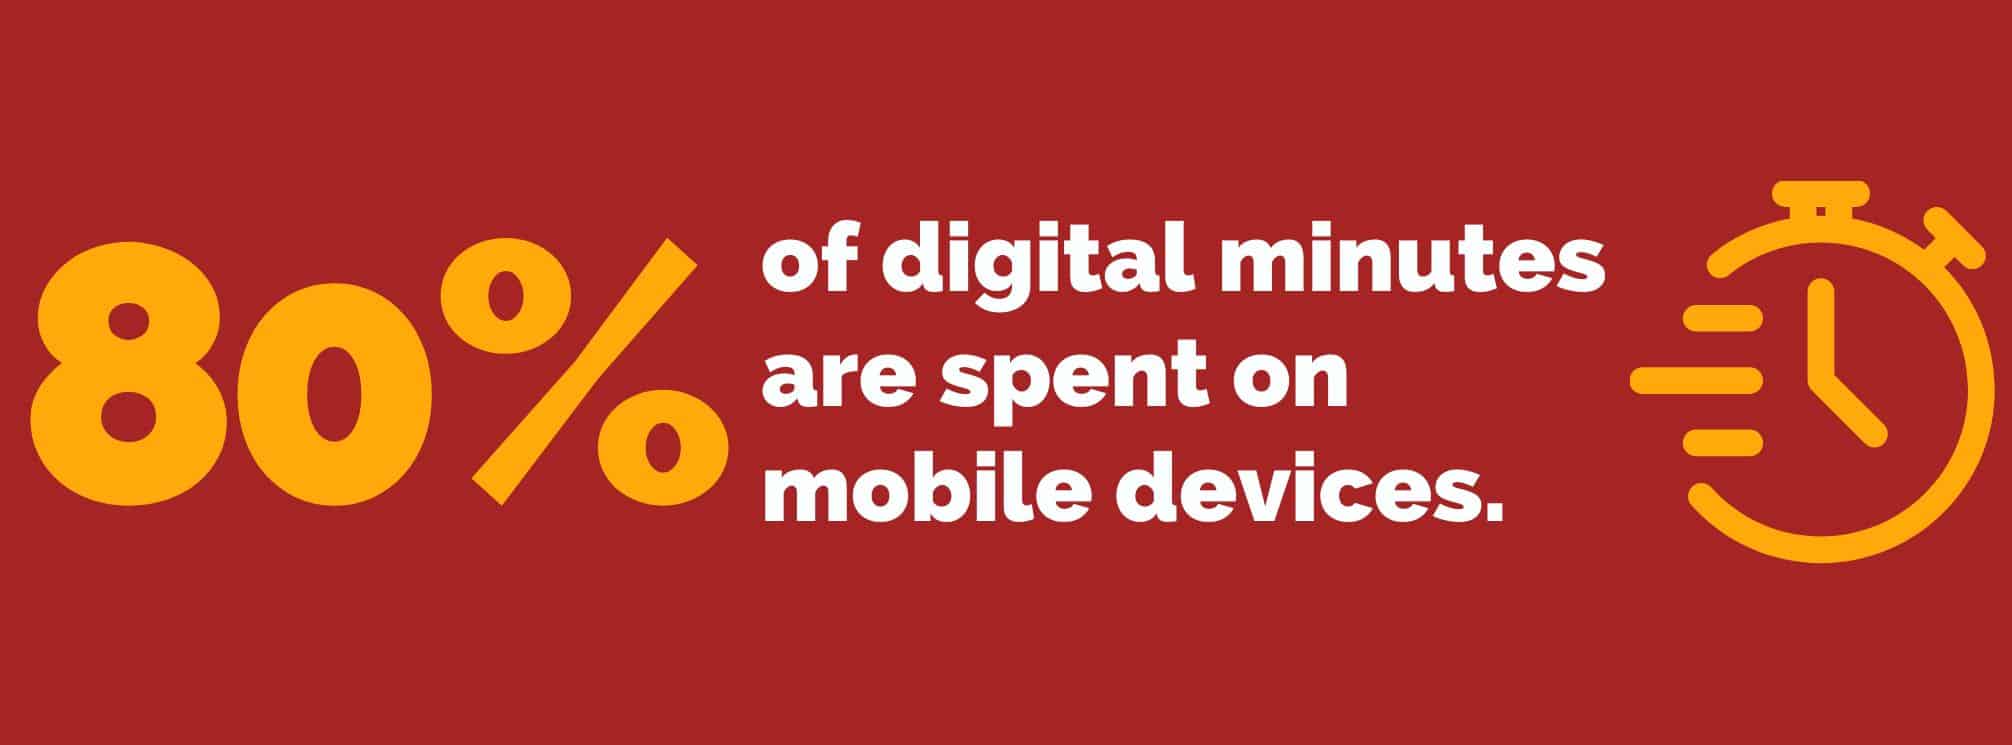 80% of digital minutes are spent on mobile devices